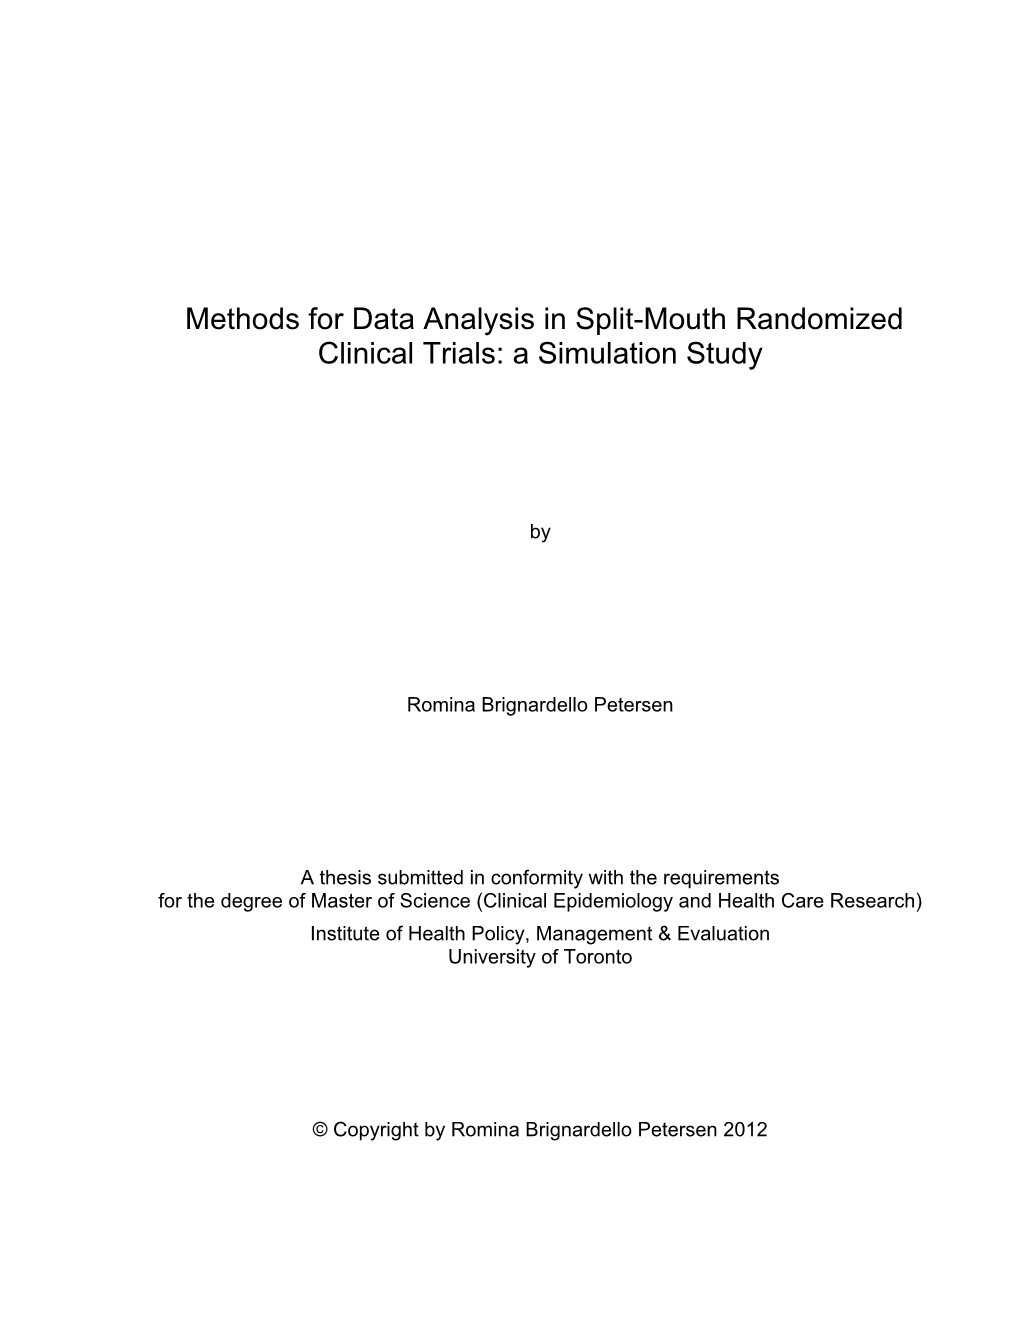 Methods for Data Analysis in Split-Mouth Randomized Clinical Trials: a Simulation Study